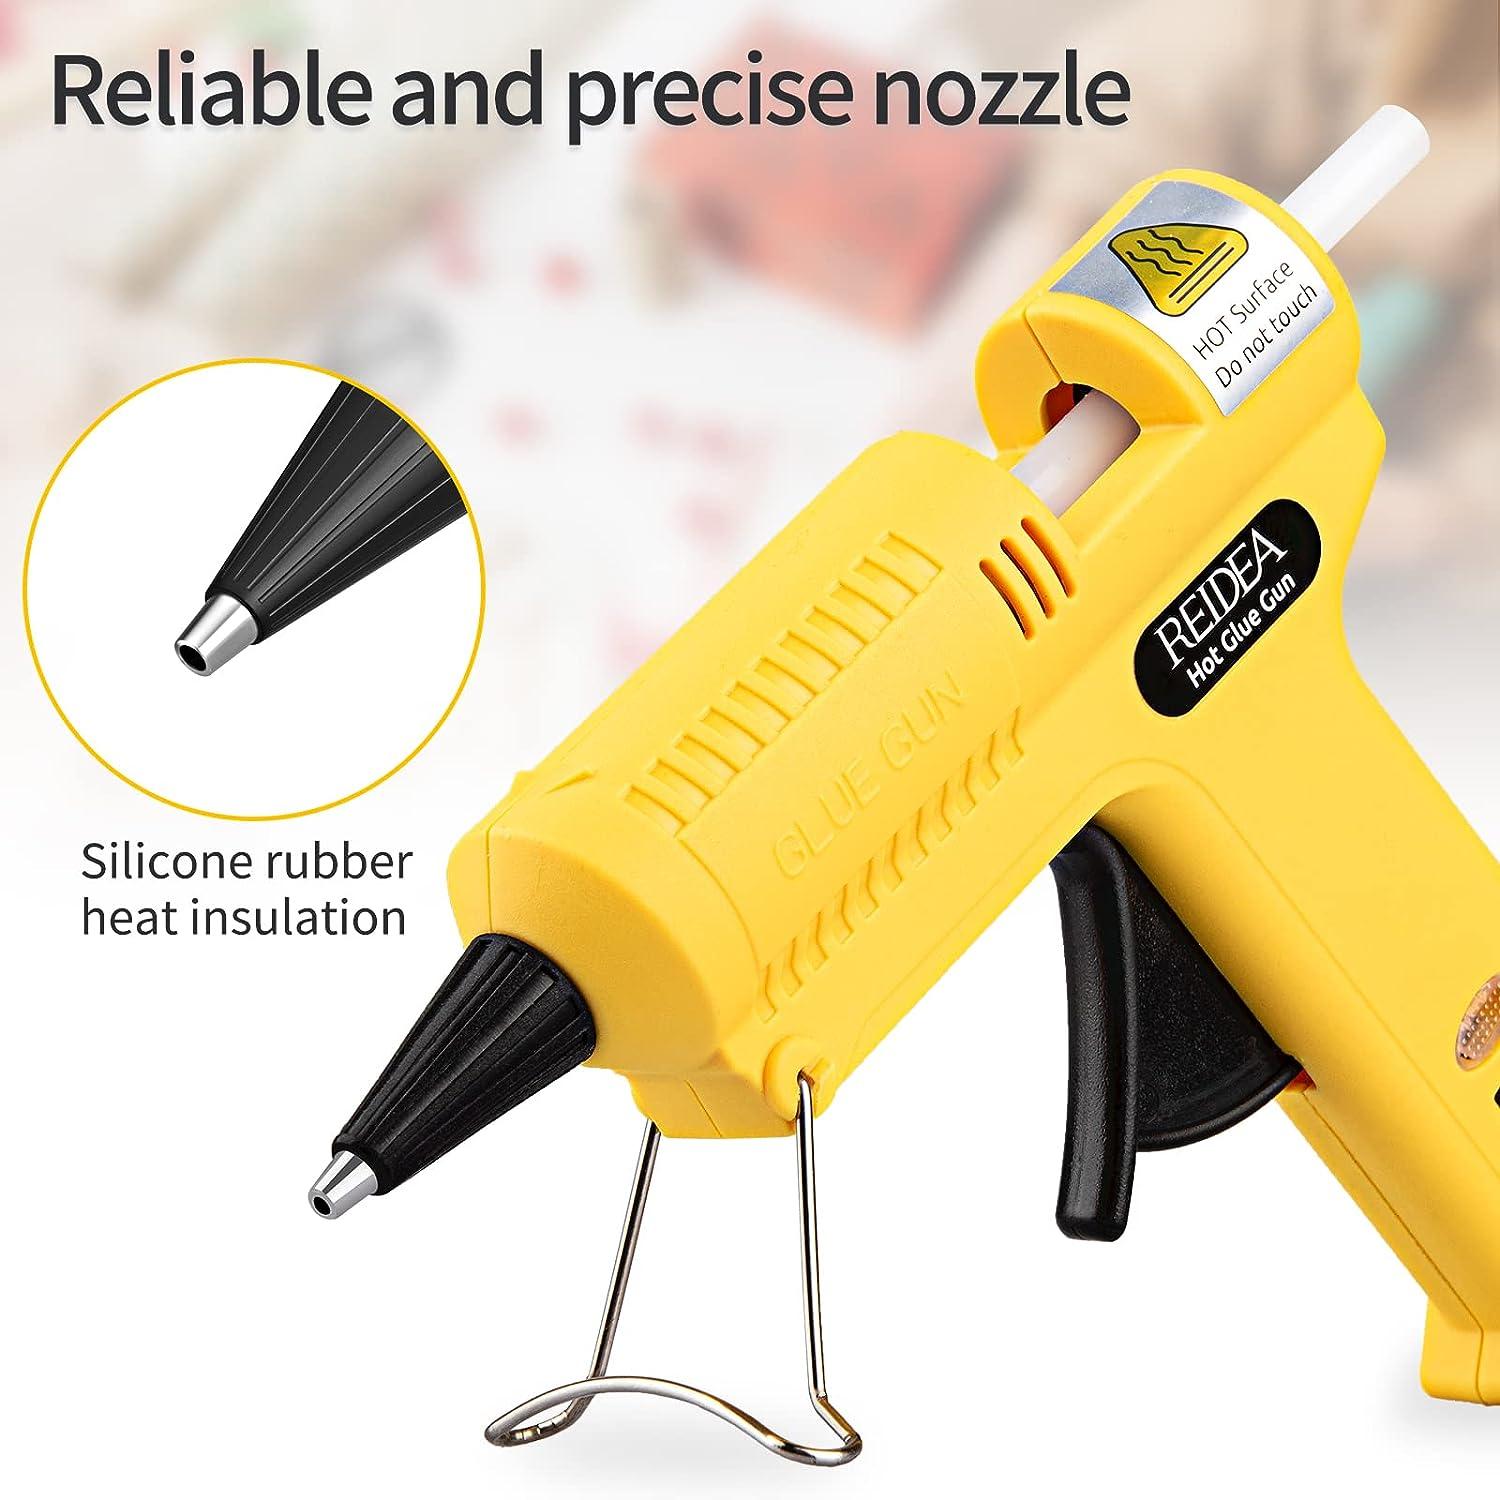 REIDEA Mini Hot Glue Gun Fast Heating with Support Kickstand for DIY Arts &  Crafts Projects Home Repairs Card Plastic Wood Glass Fabric Yellow